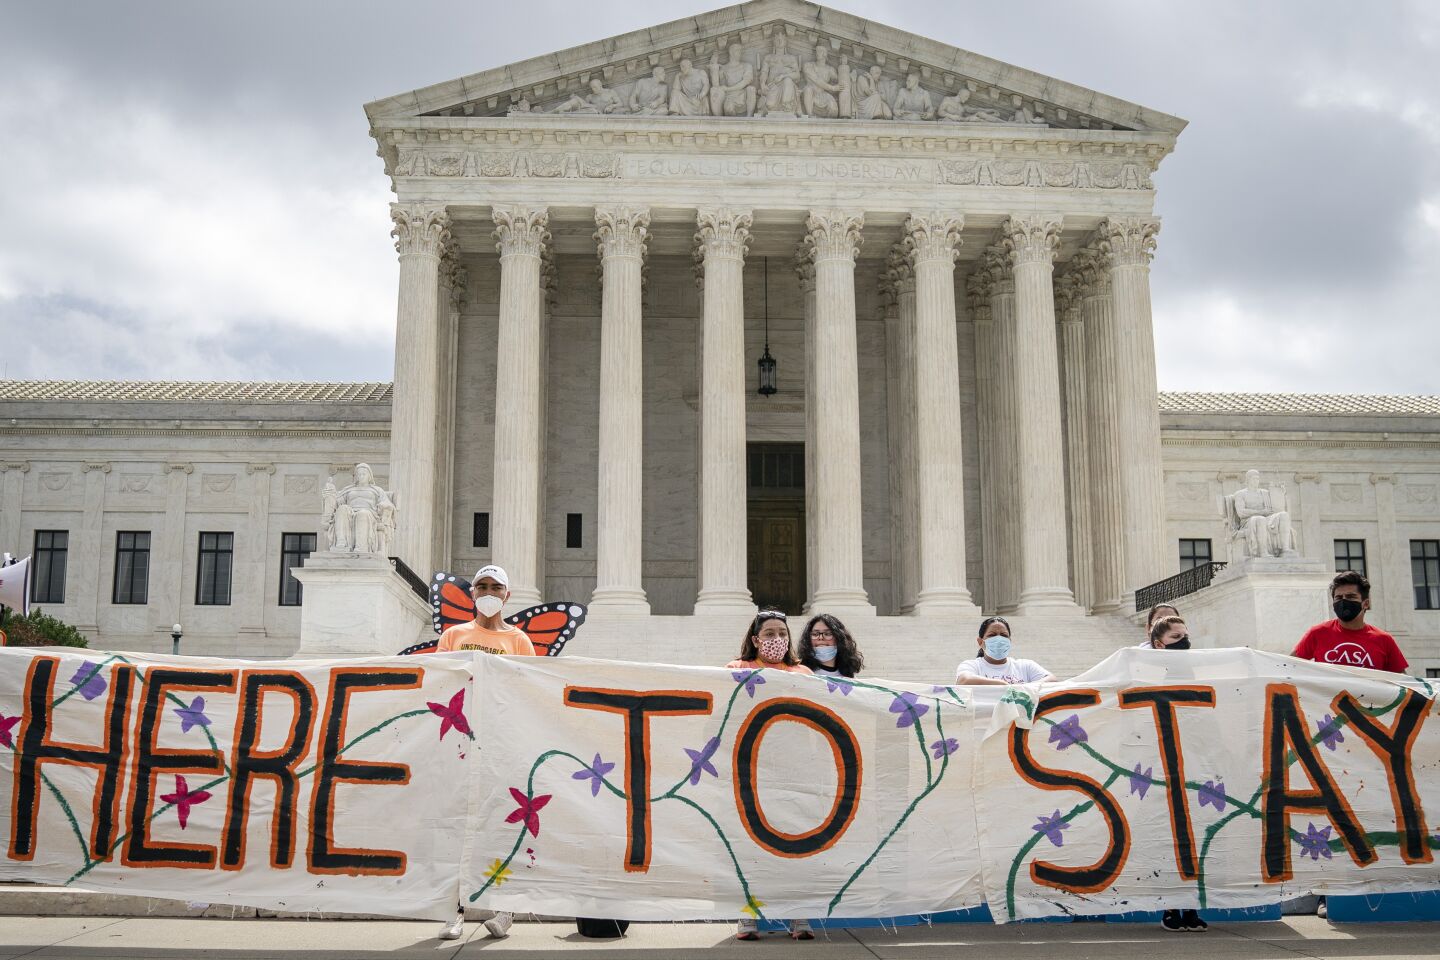 A rally outside the U.S. Supreme Court building.